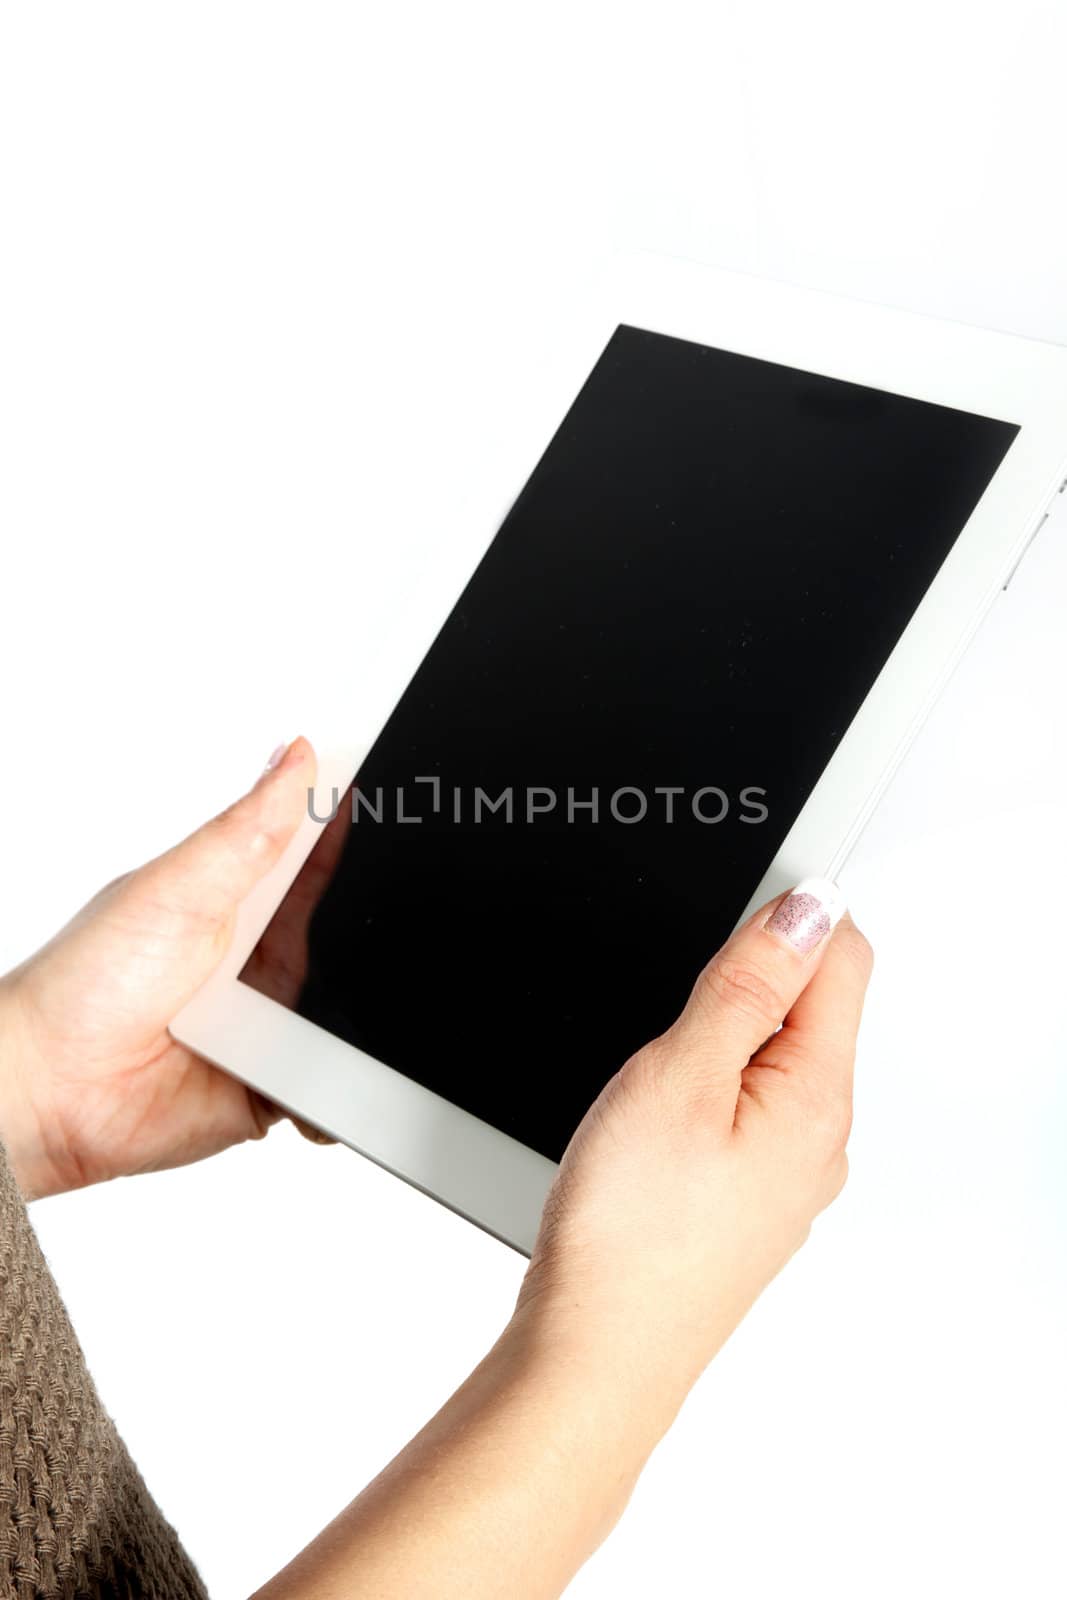 Cropped view isolated image on white of female hands holding a touchscreen tablet with a blank screen angled towards the camera